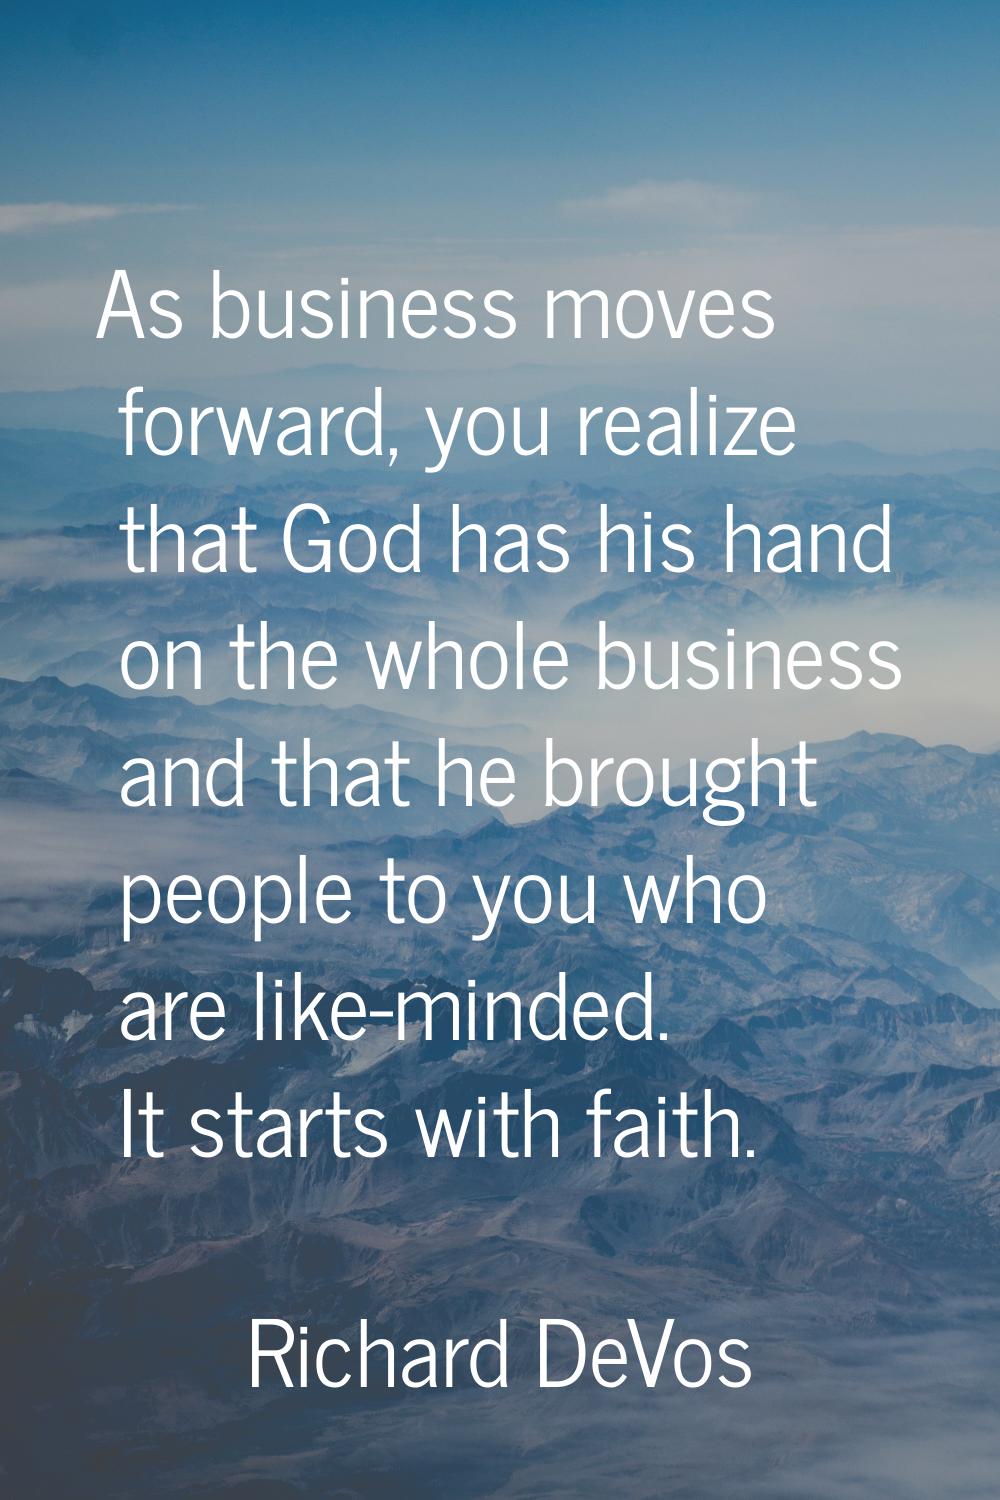 As business moves forward, you realize that God has his hand on the whole business and that he brou